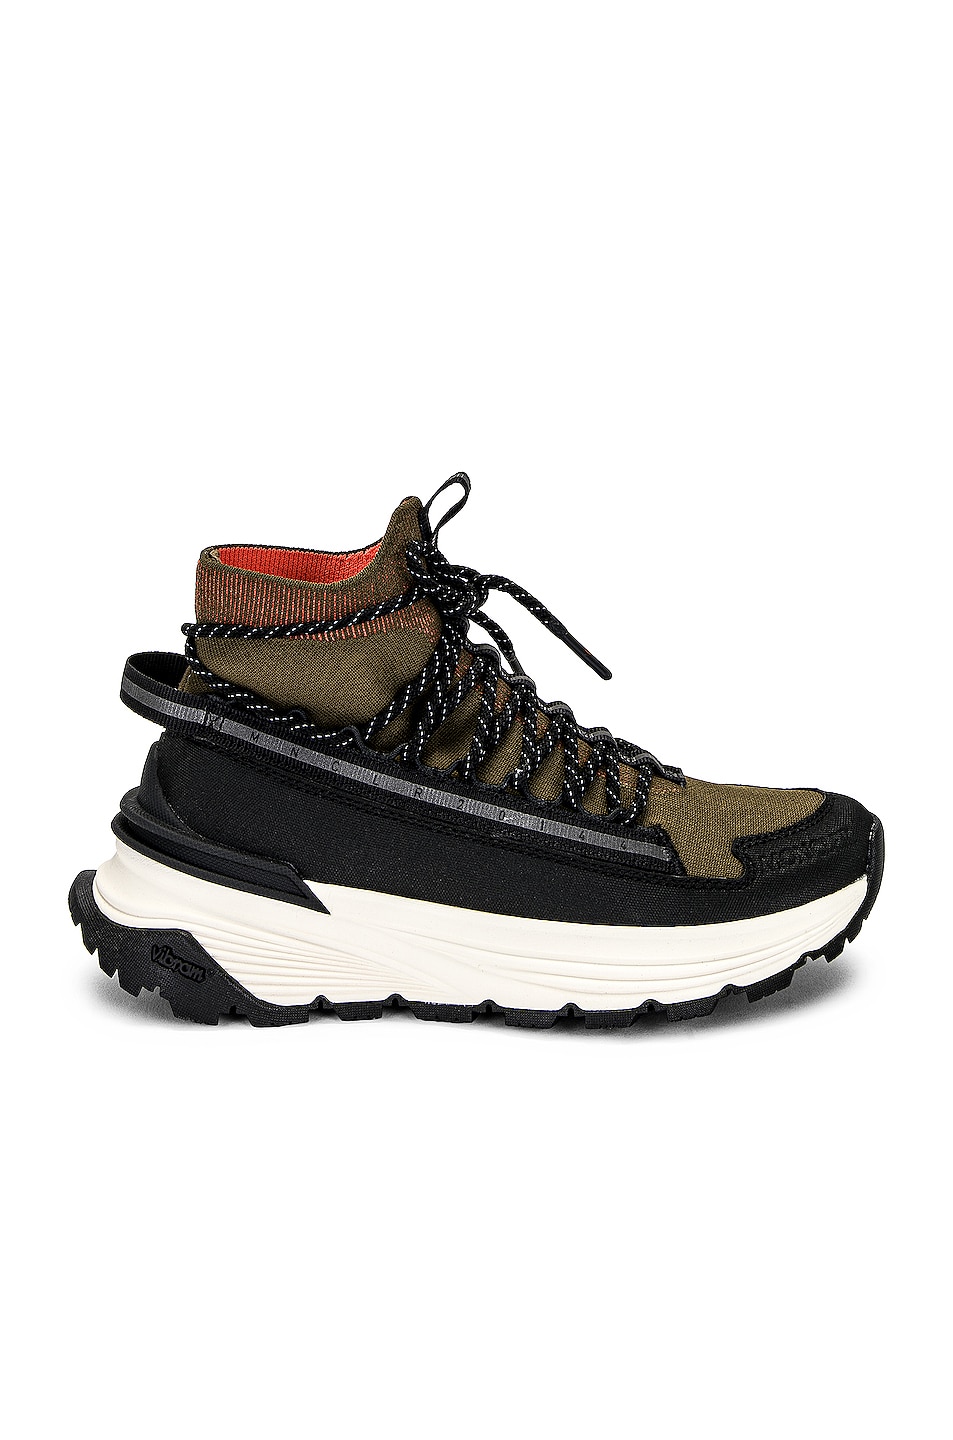 Image 1 of Moncler Knit Runner High Top Sneaker in Military Black